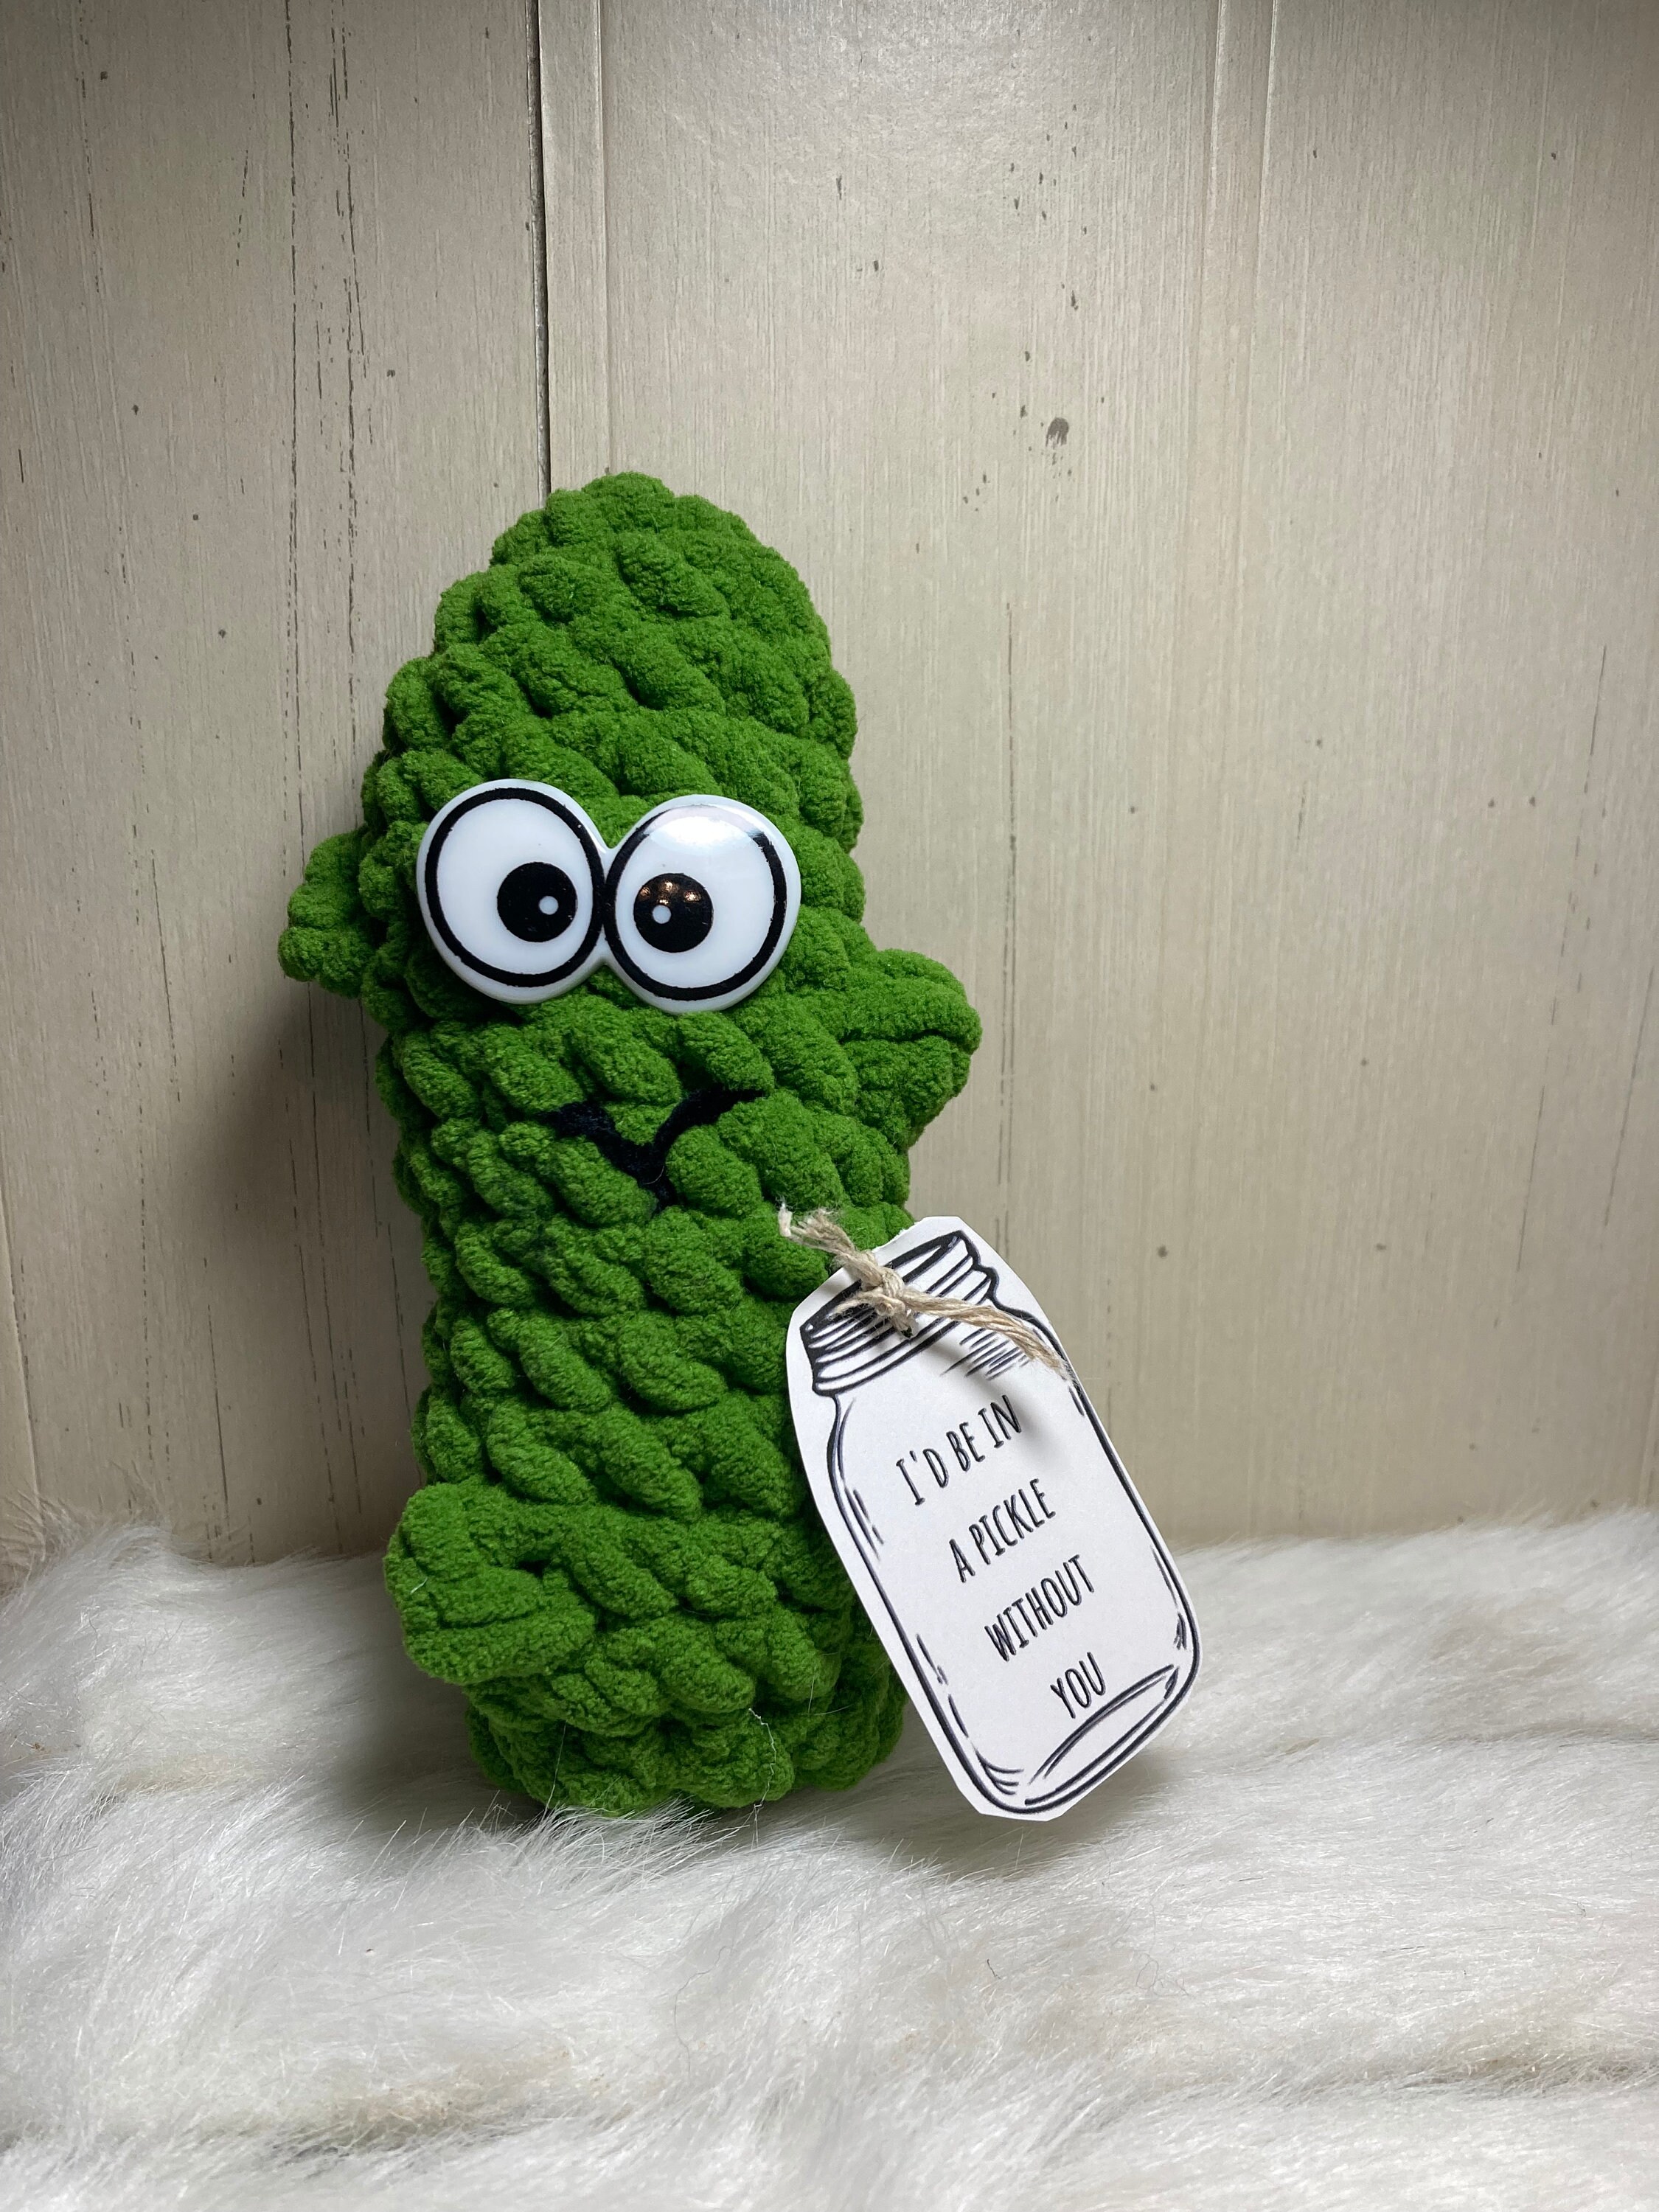 Emotional Support Pickle – The Glass Floore